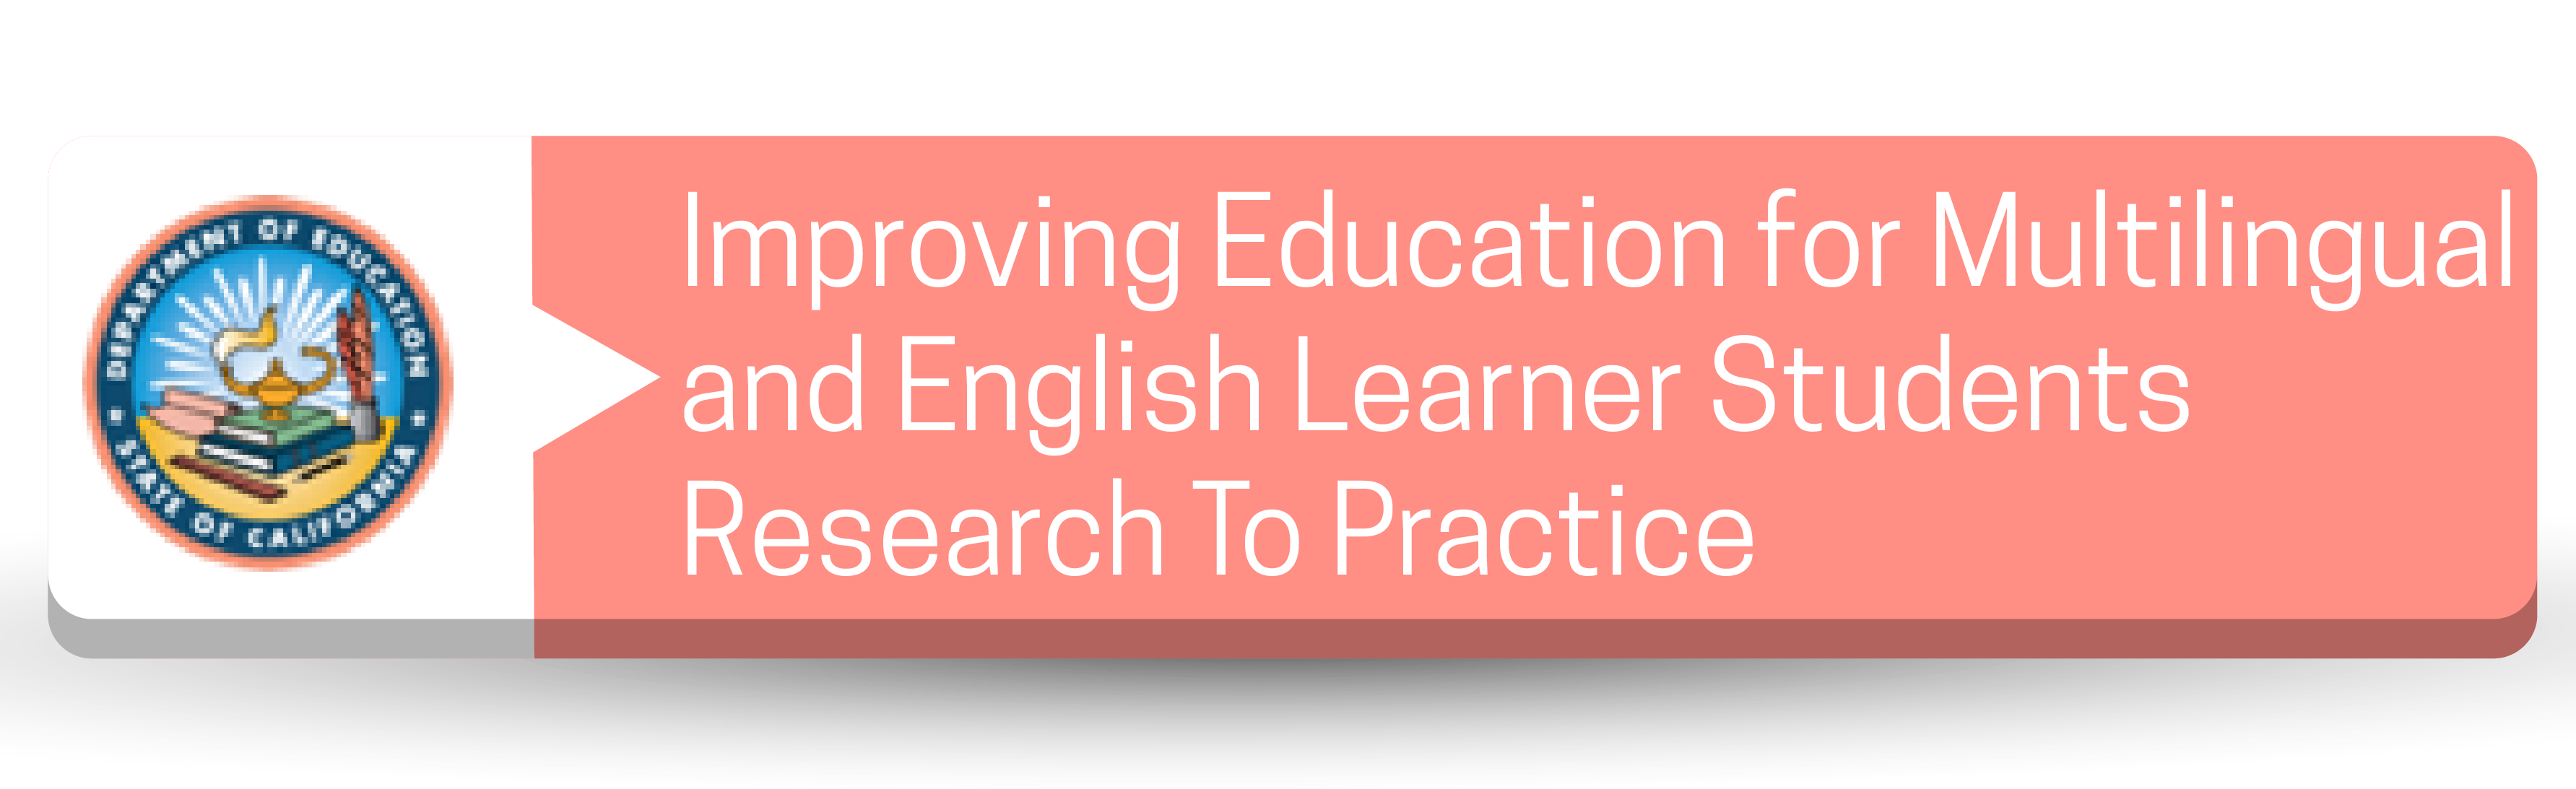 Improving Education for Multilingual and EL Students - Research To Practice Button